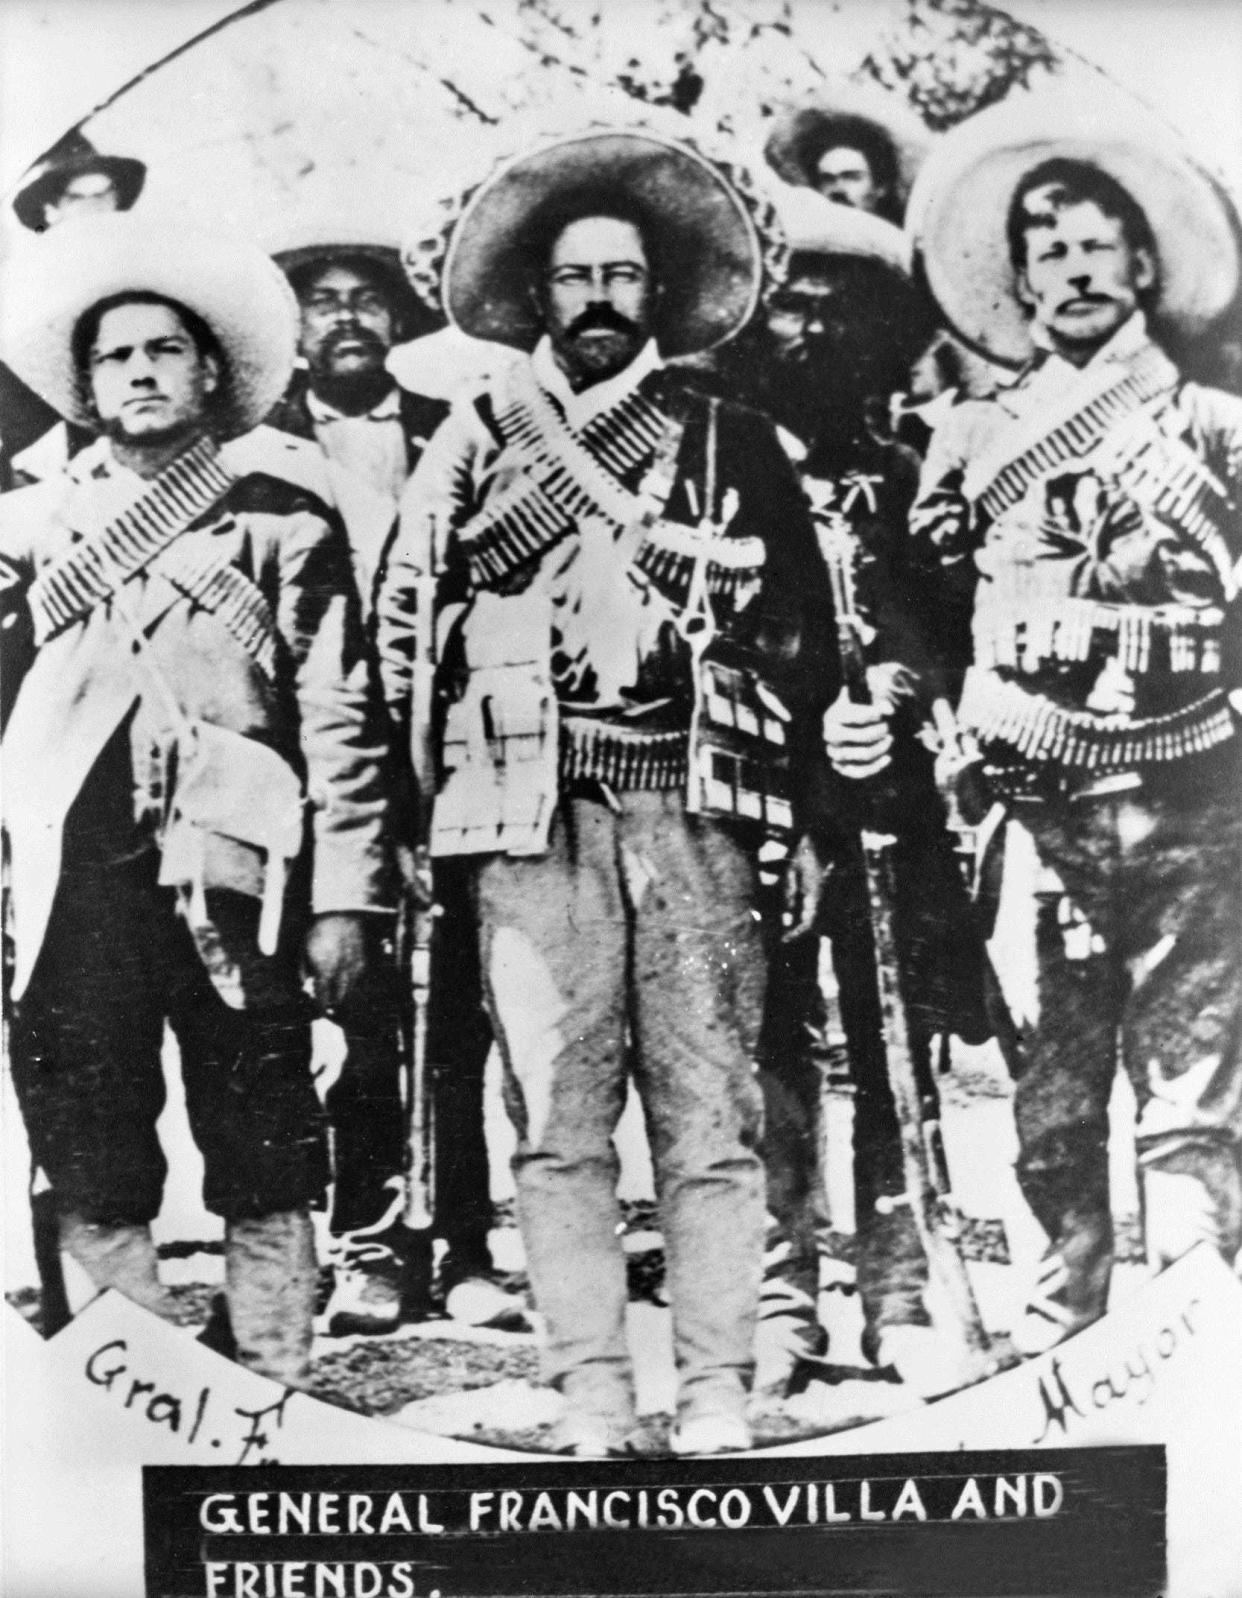 General Francisco "Pancho" Villa and friends. (undated)